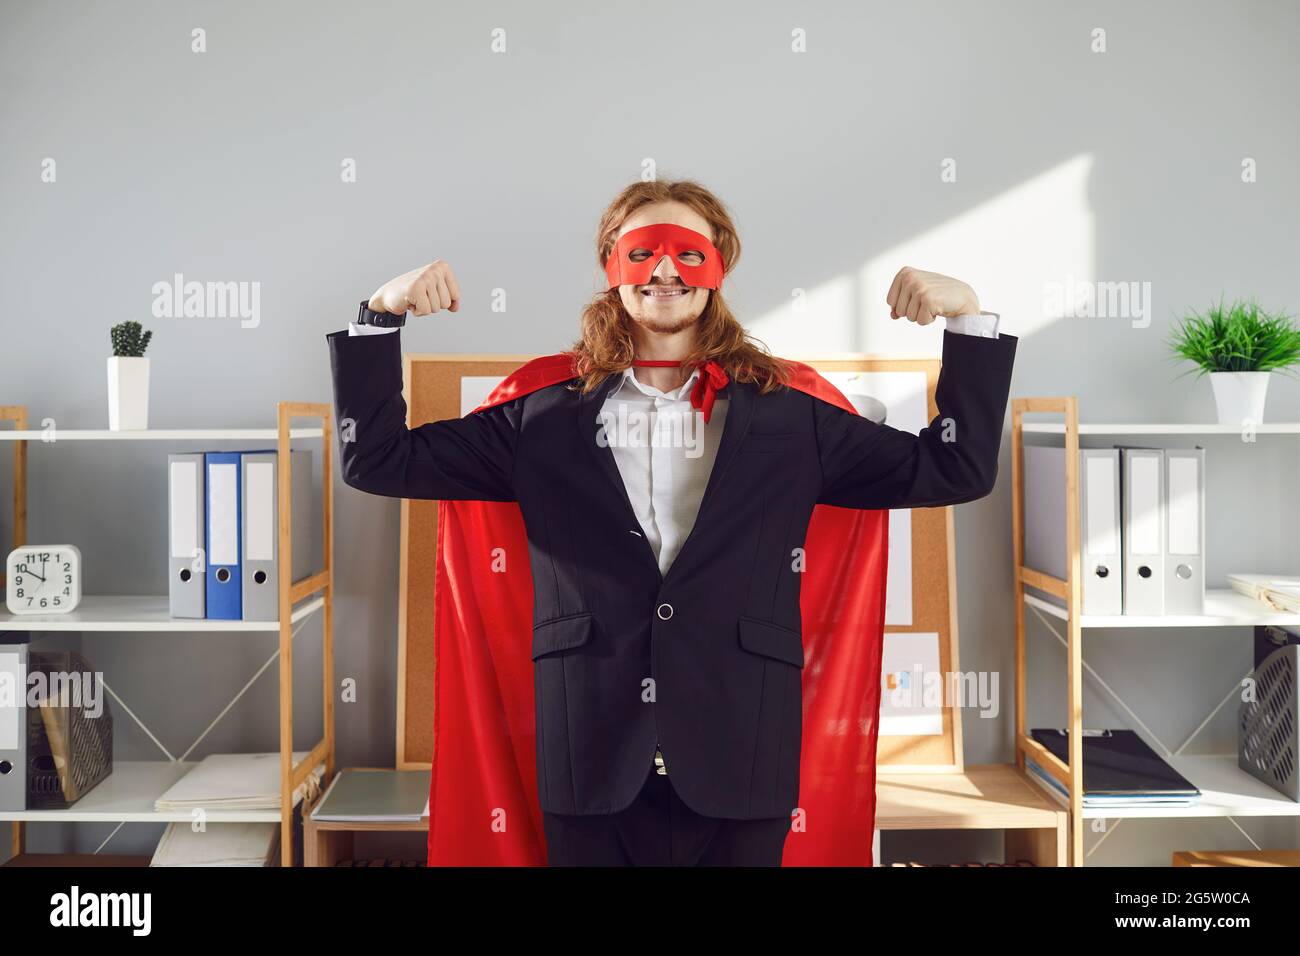 Funny office worker in red superhero mask and cape demonstrating can-do attitude Stock Photo